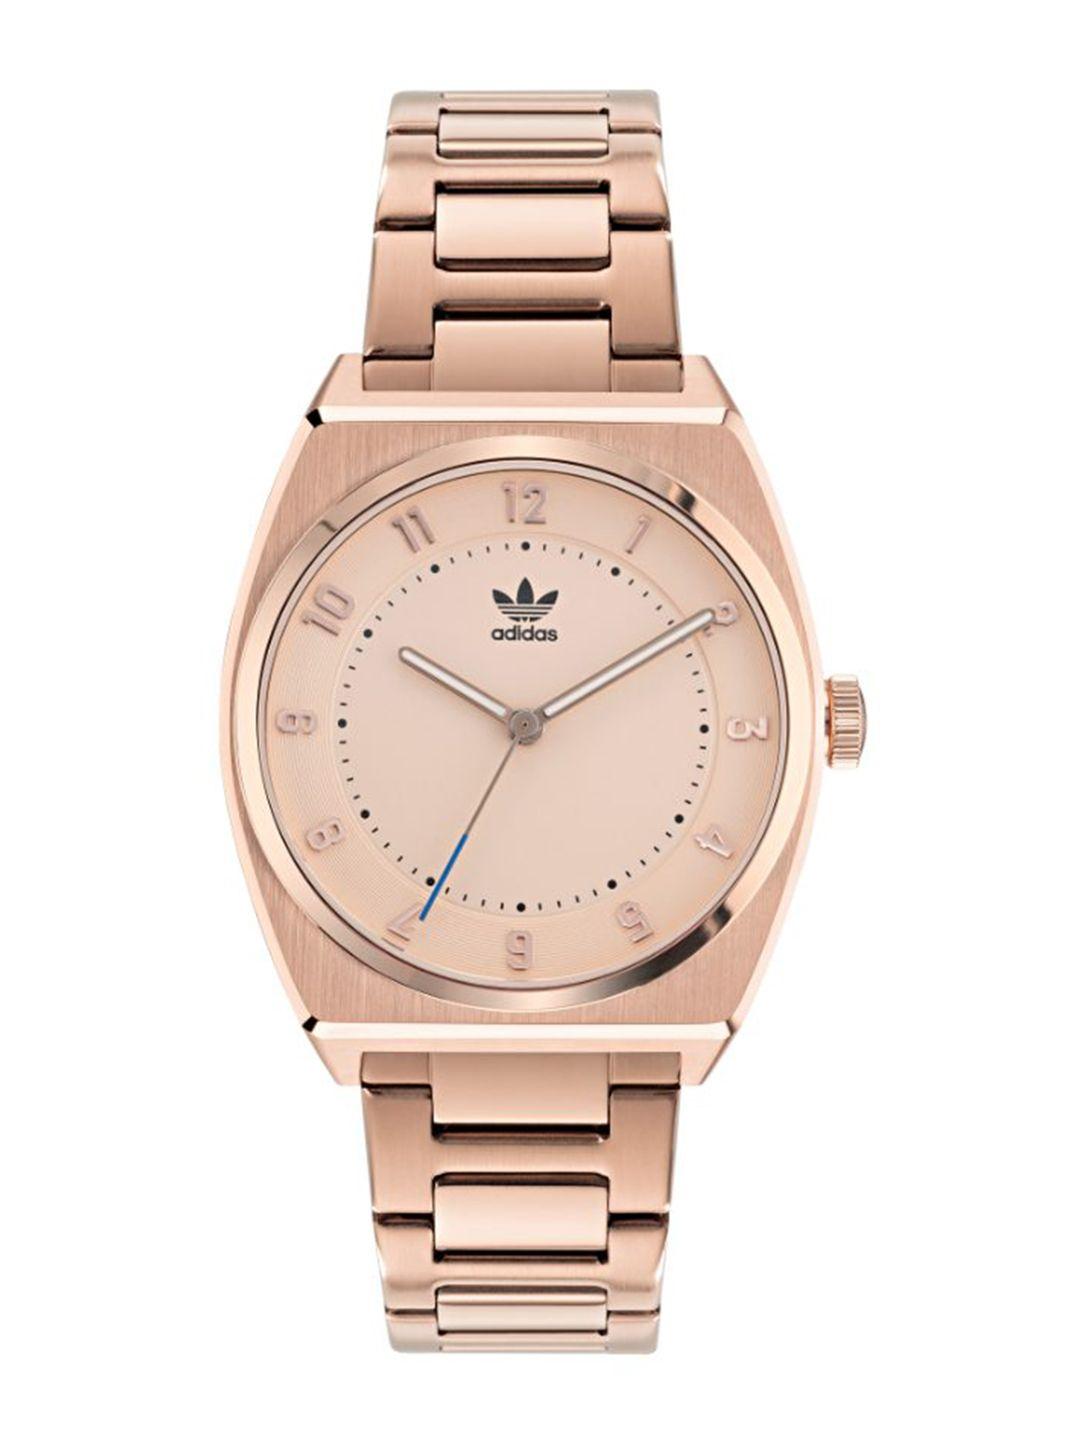 adidas-originals-men-dial-&-stainless-steel-bracelet-style-straps-analogue-watch-aosy22028